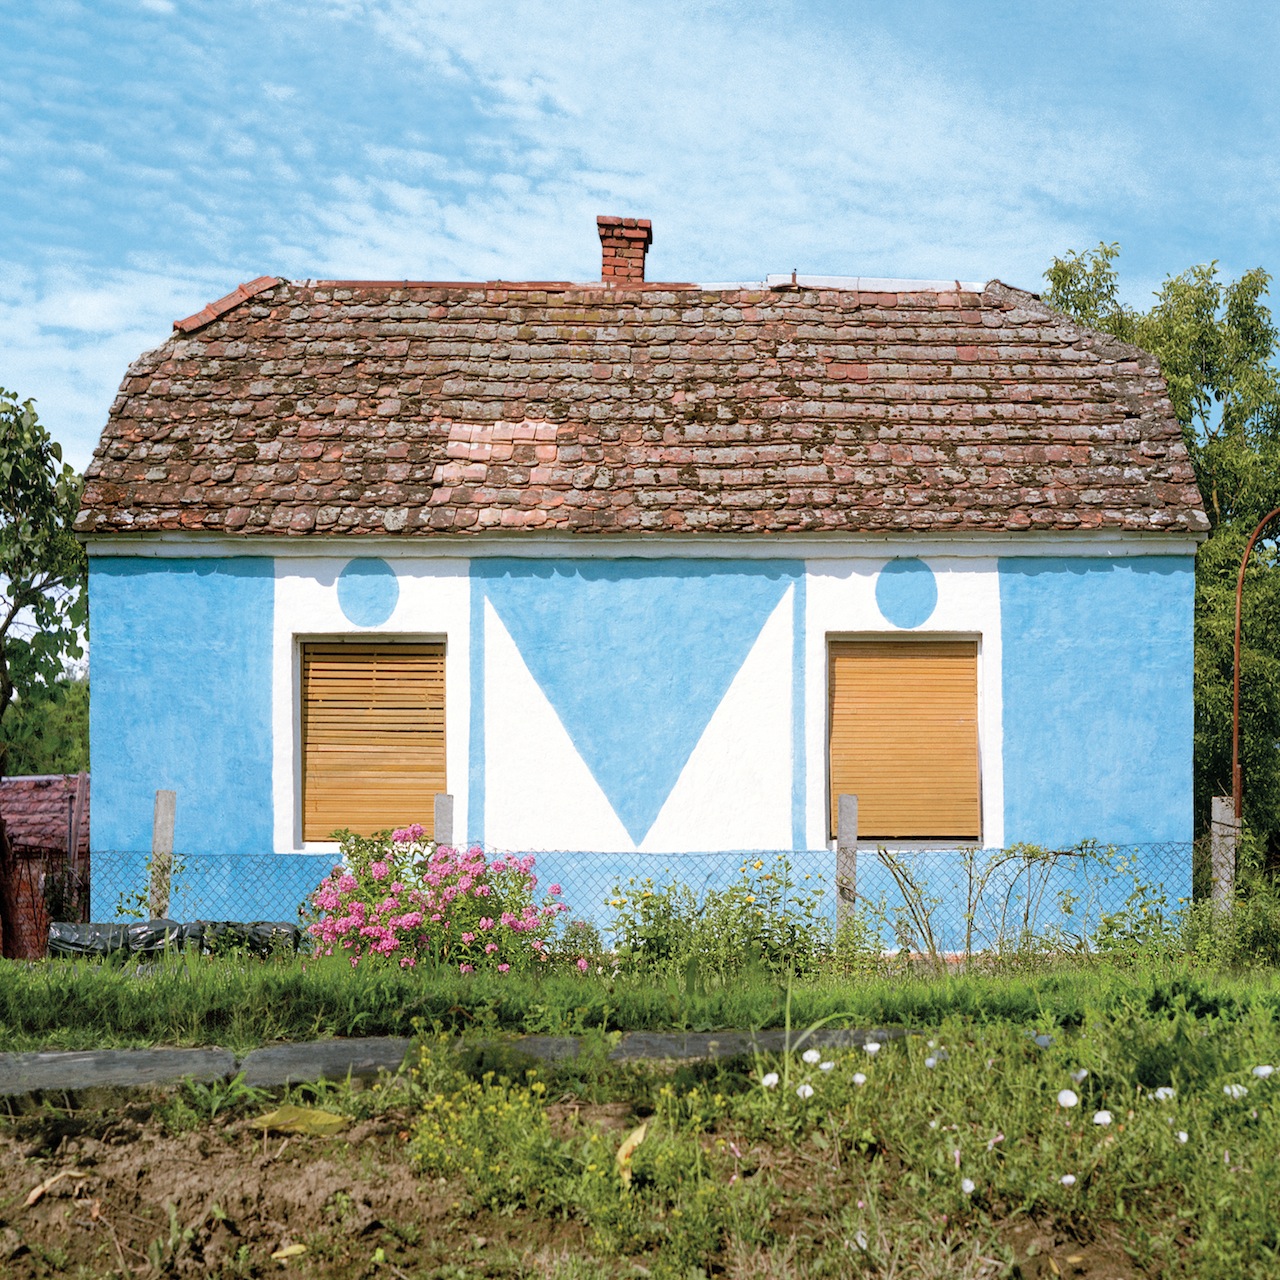 How Hungary's Painted Homes Rebelled Against the Socialist System